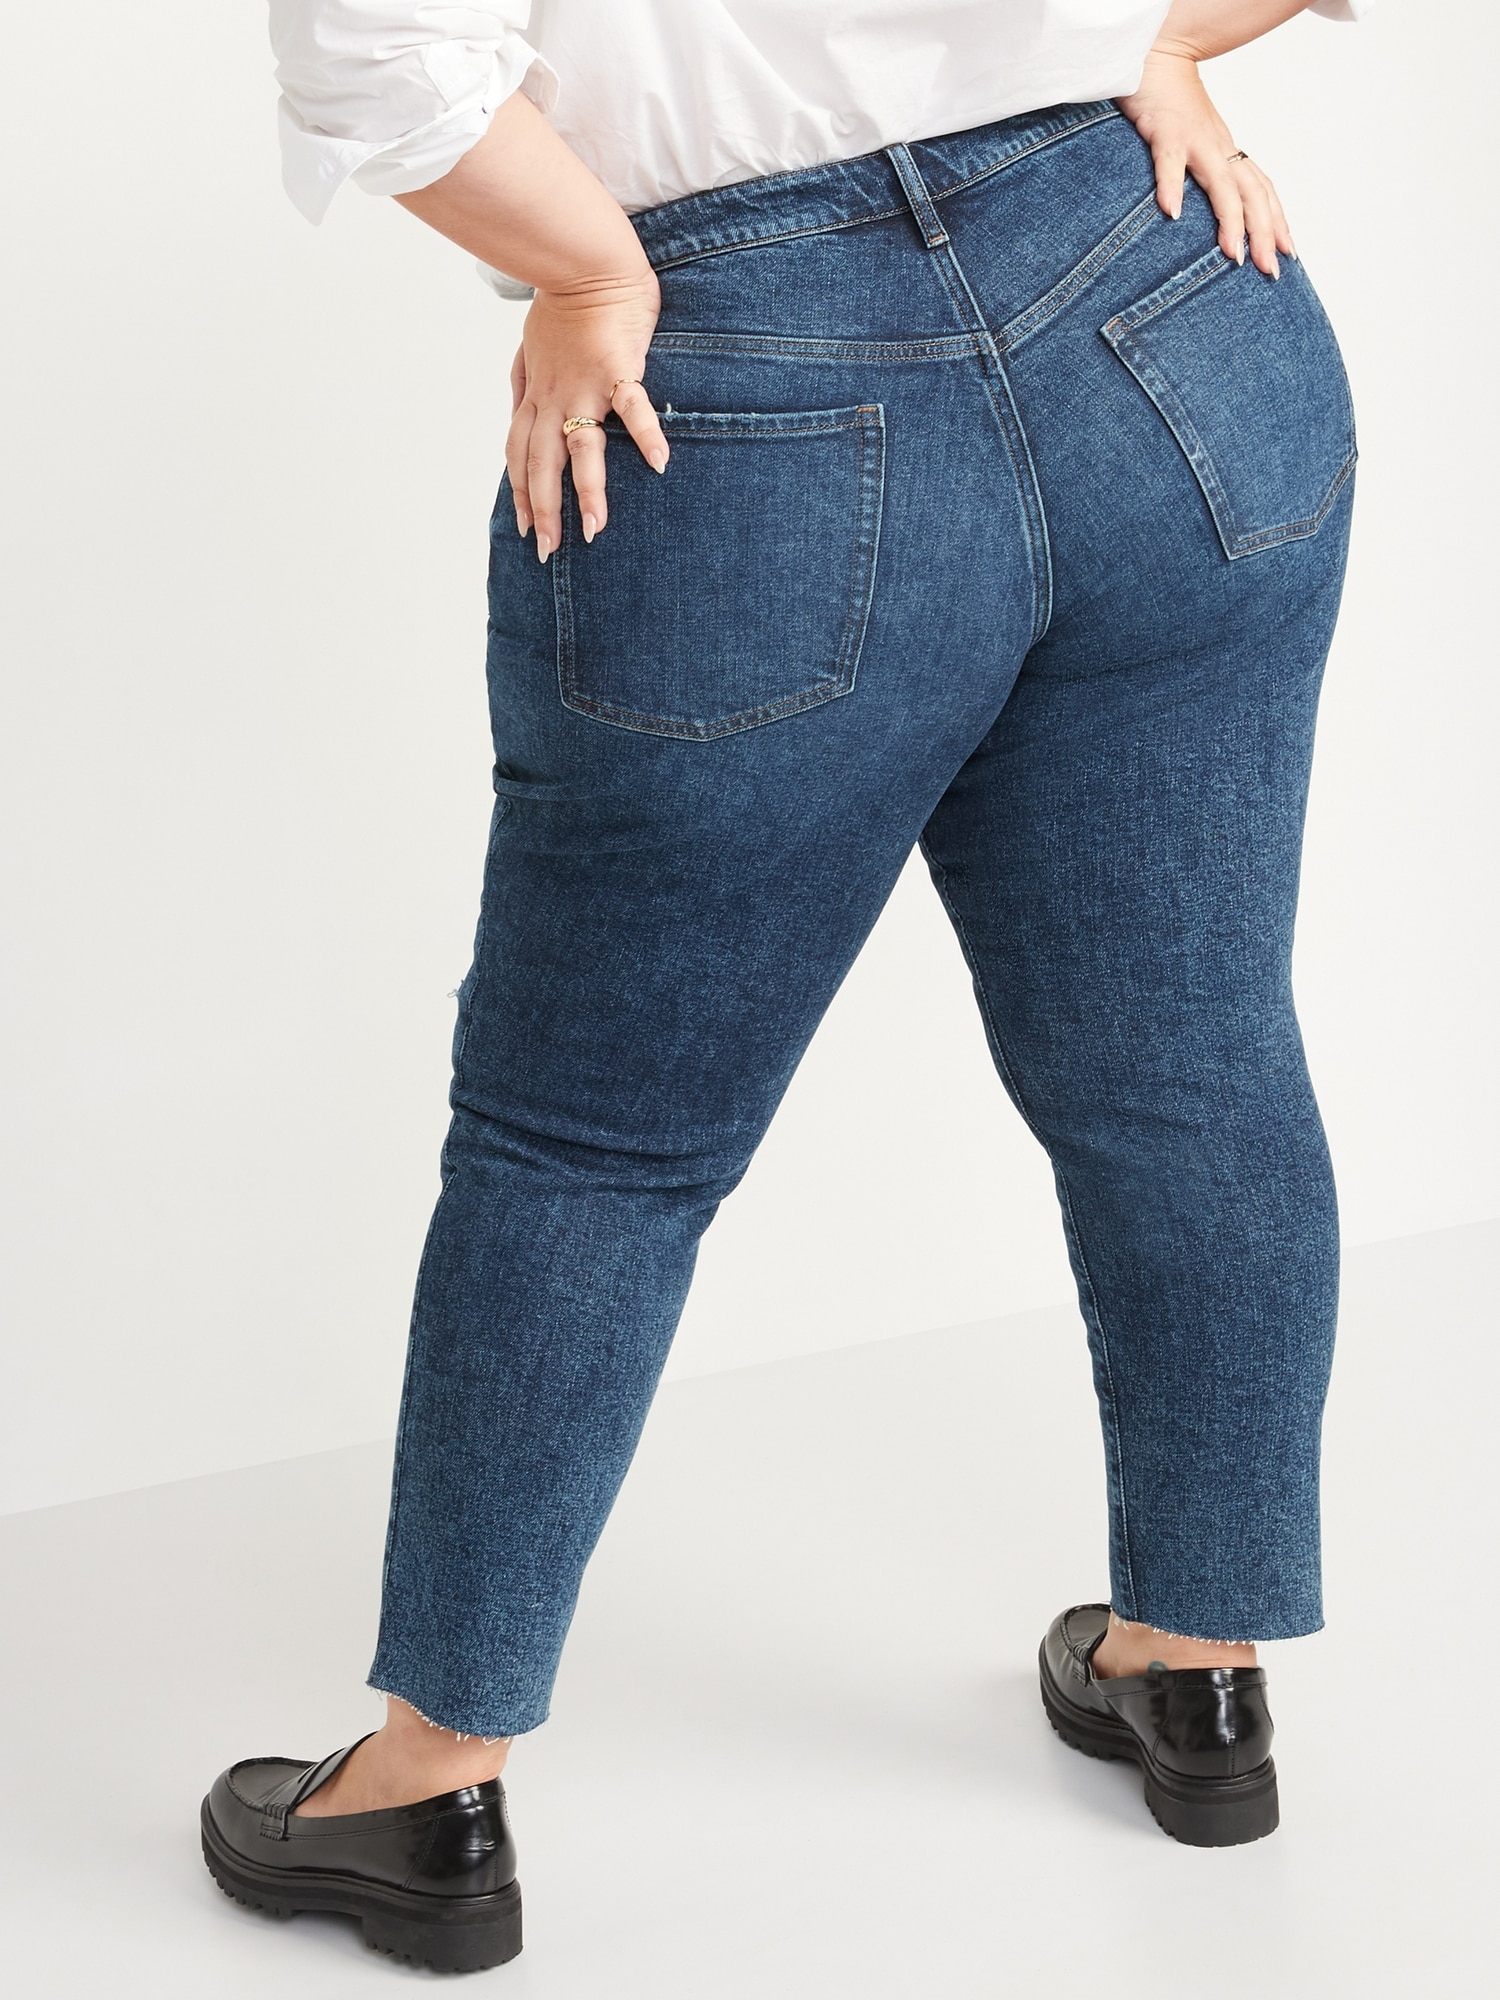 Curvy OG Ripped Jeans for | Old Navy